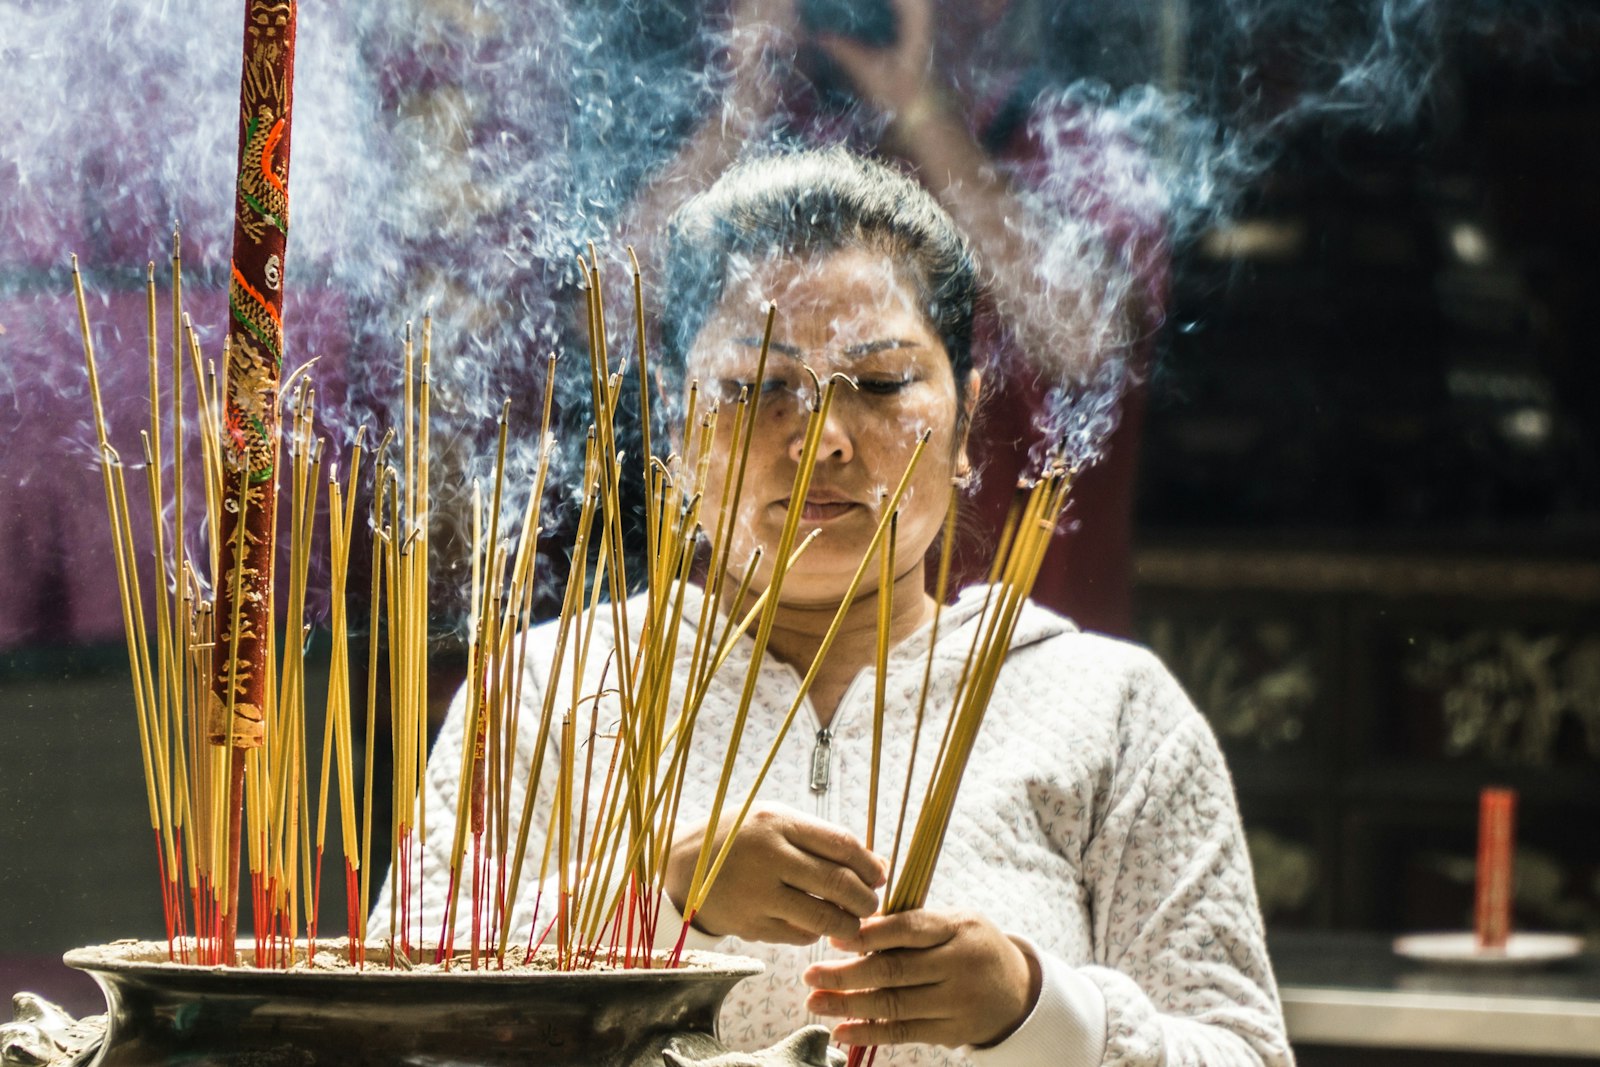 Sony a6000 sample photo. Woman holding brown incense photography